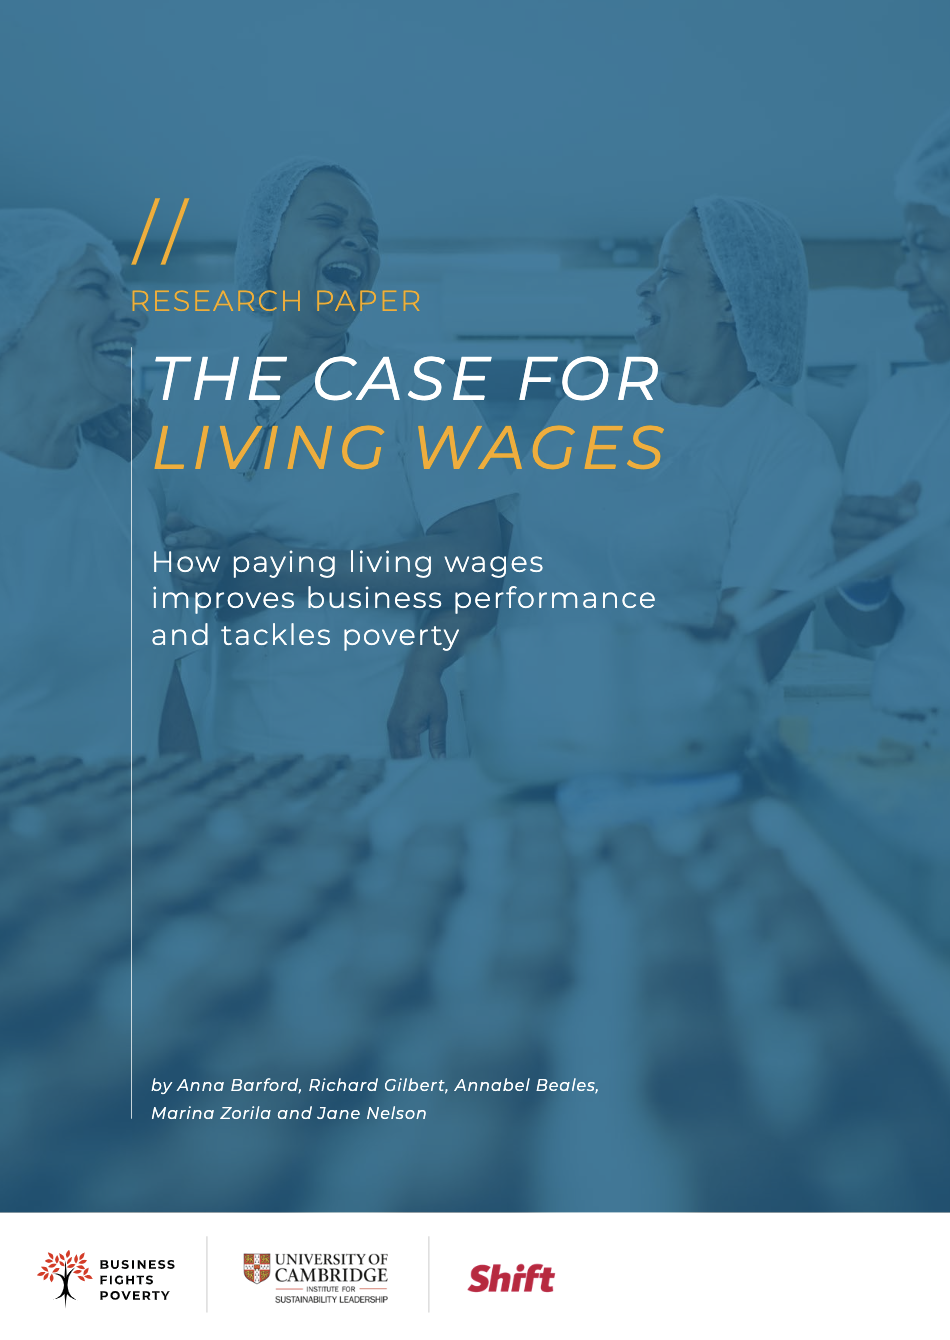 The Case for Living Wages: How Paying Living Wages Improves Business Performance and Tackles Poverty